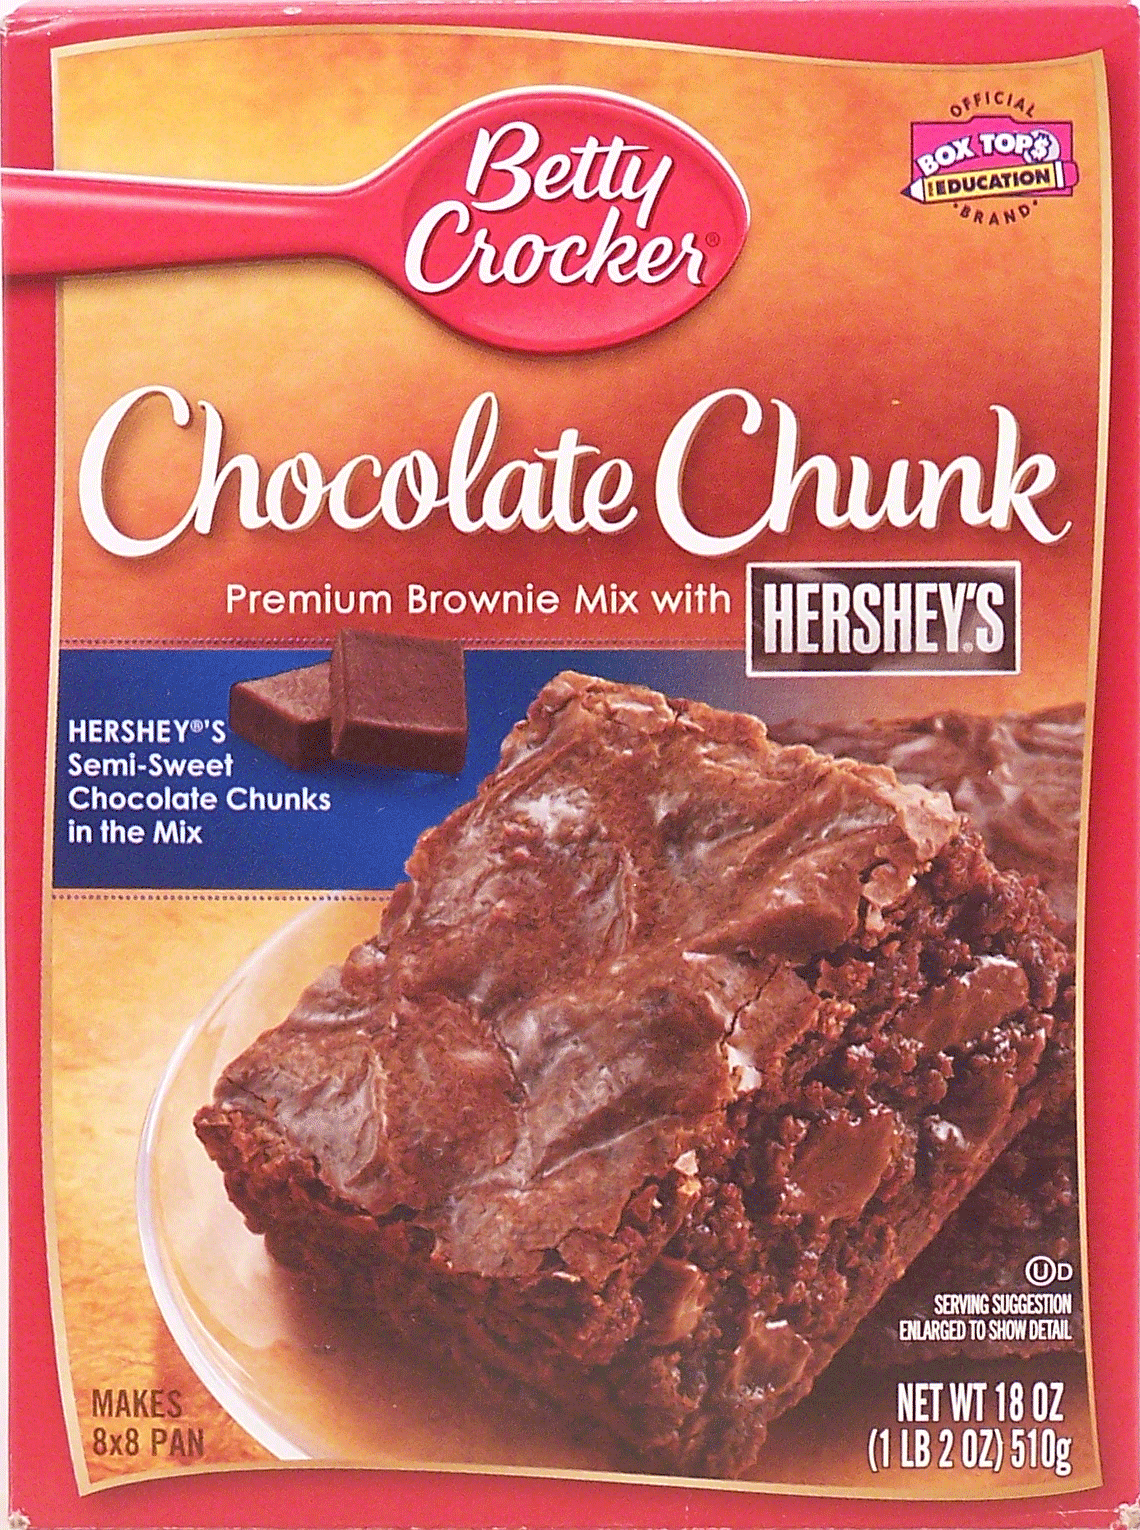 Betty Crocker  chocolate chunk premium brownie mix with Hershey's Full-Size Picture